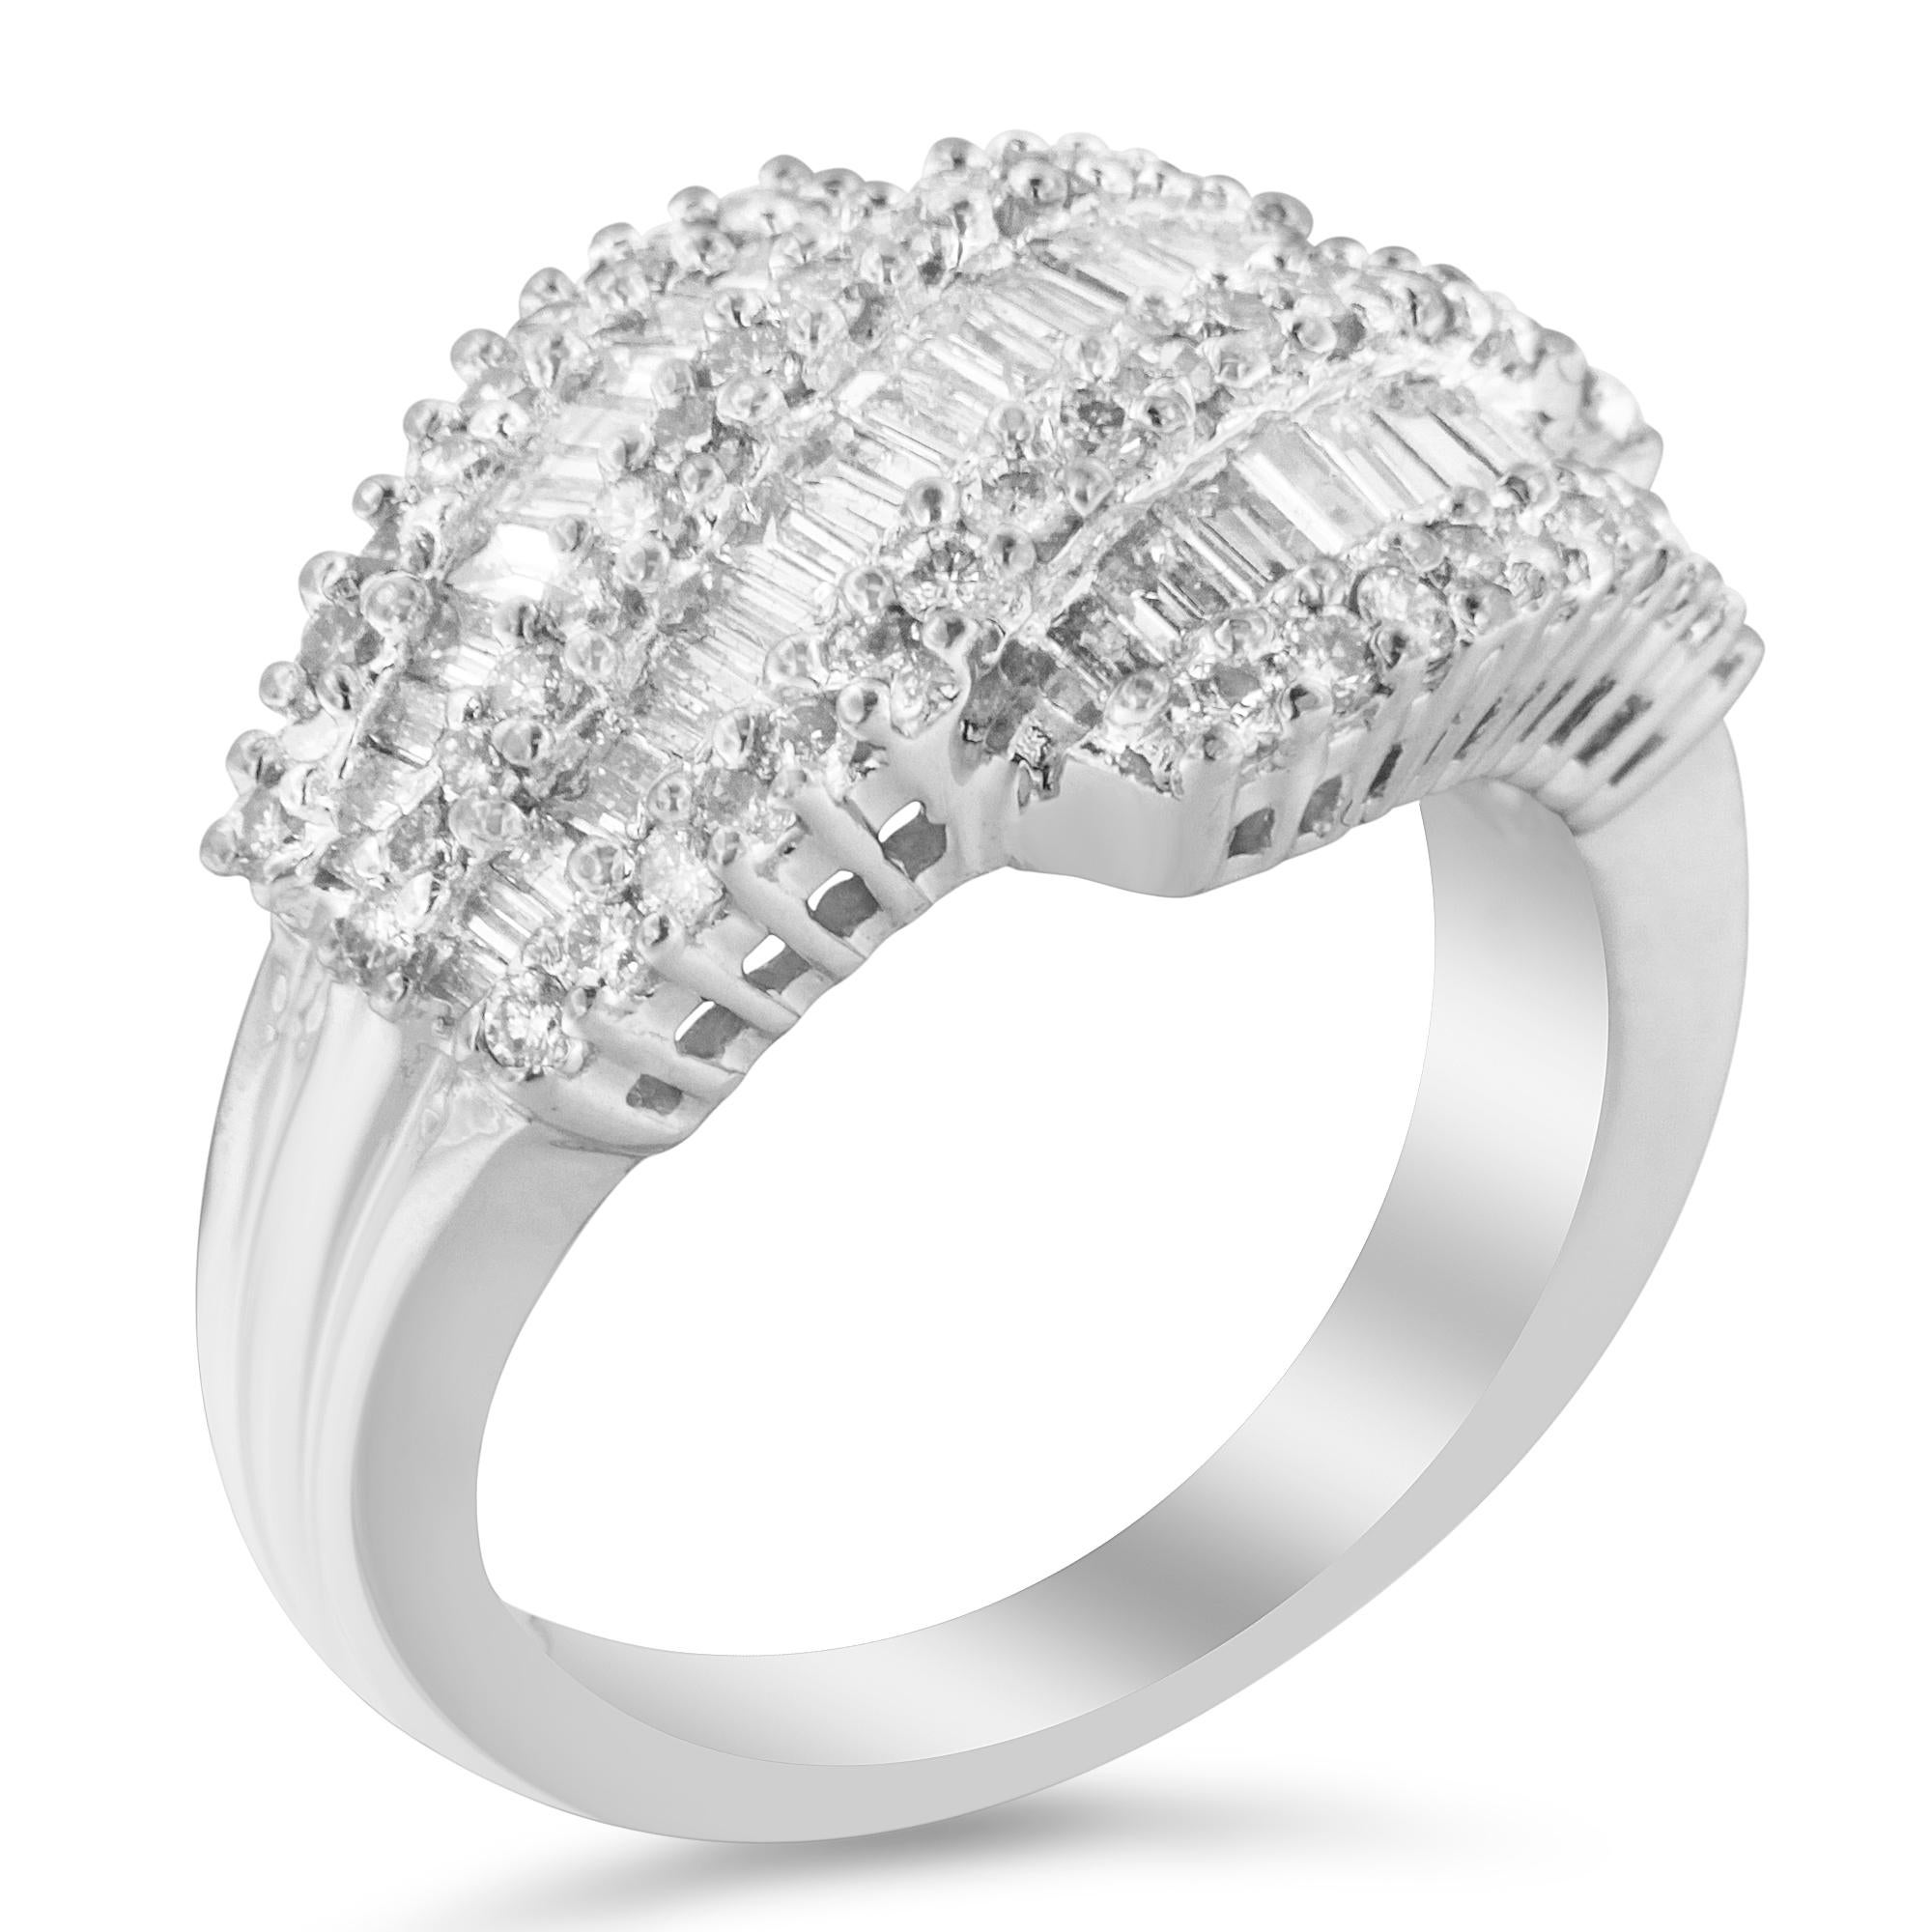 For Sale:  14K White Gold 1 3/4 Carat Diamond Cocktail Ring Band 4